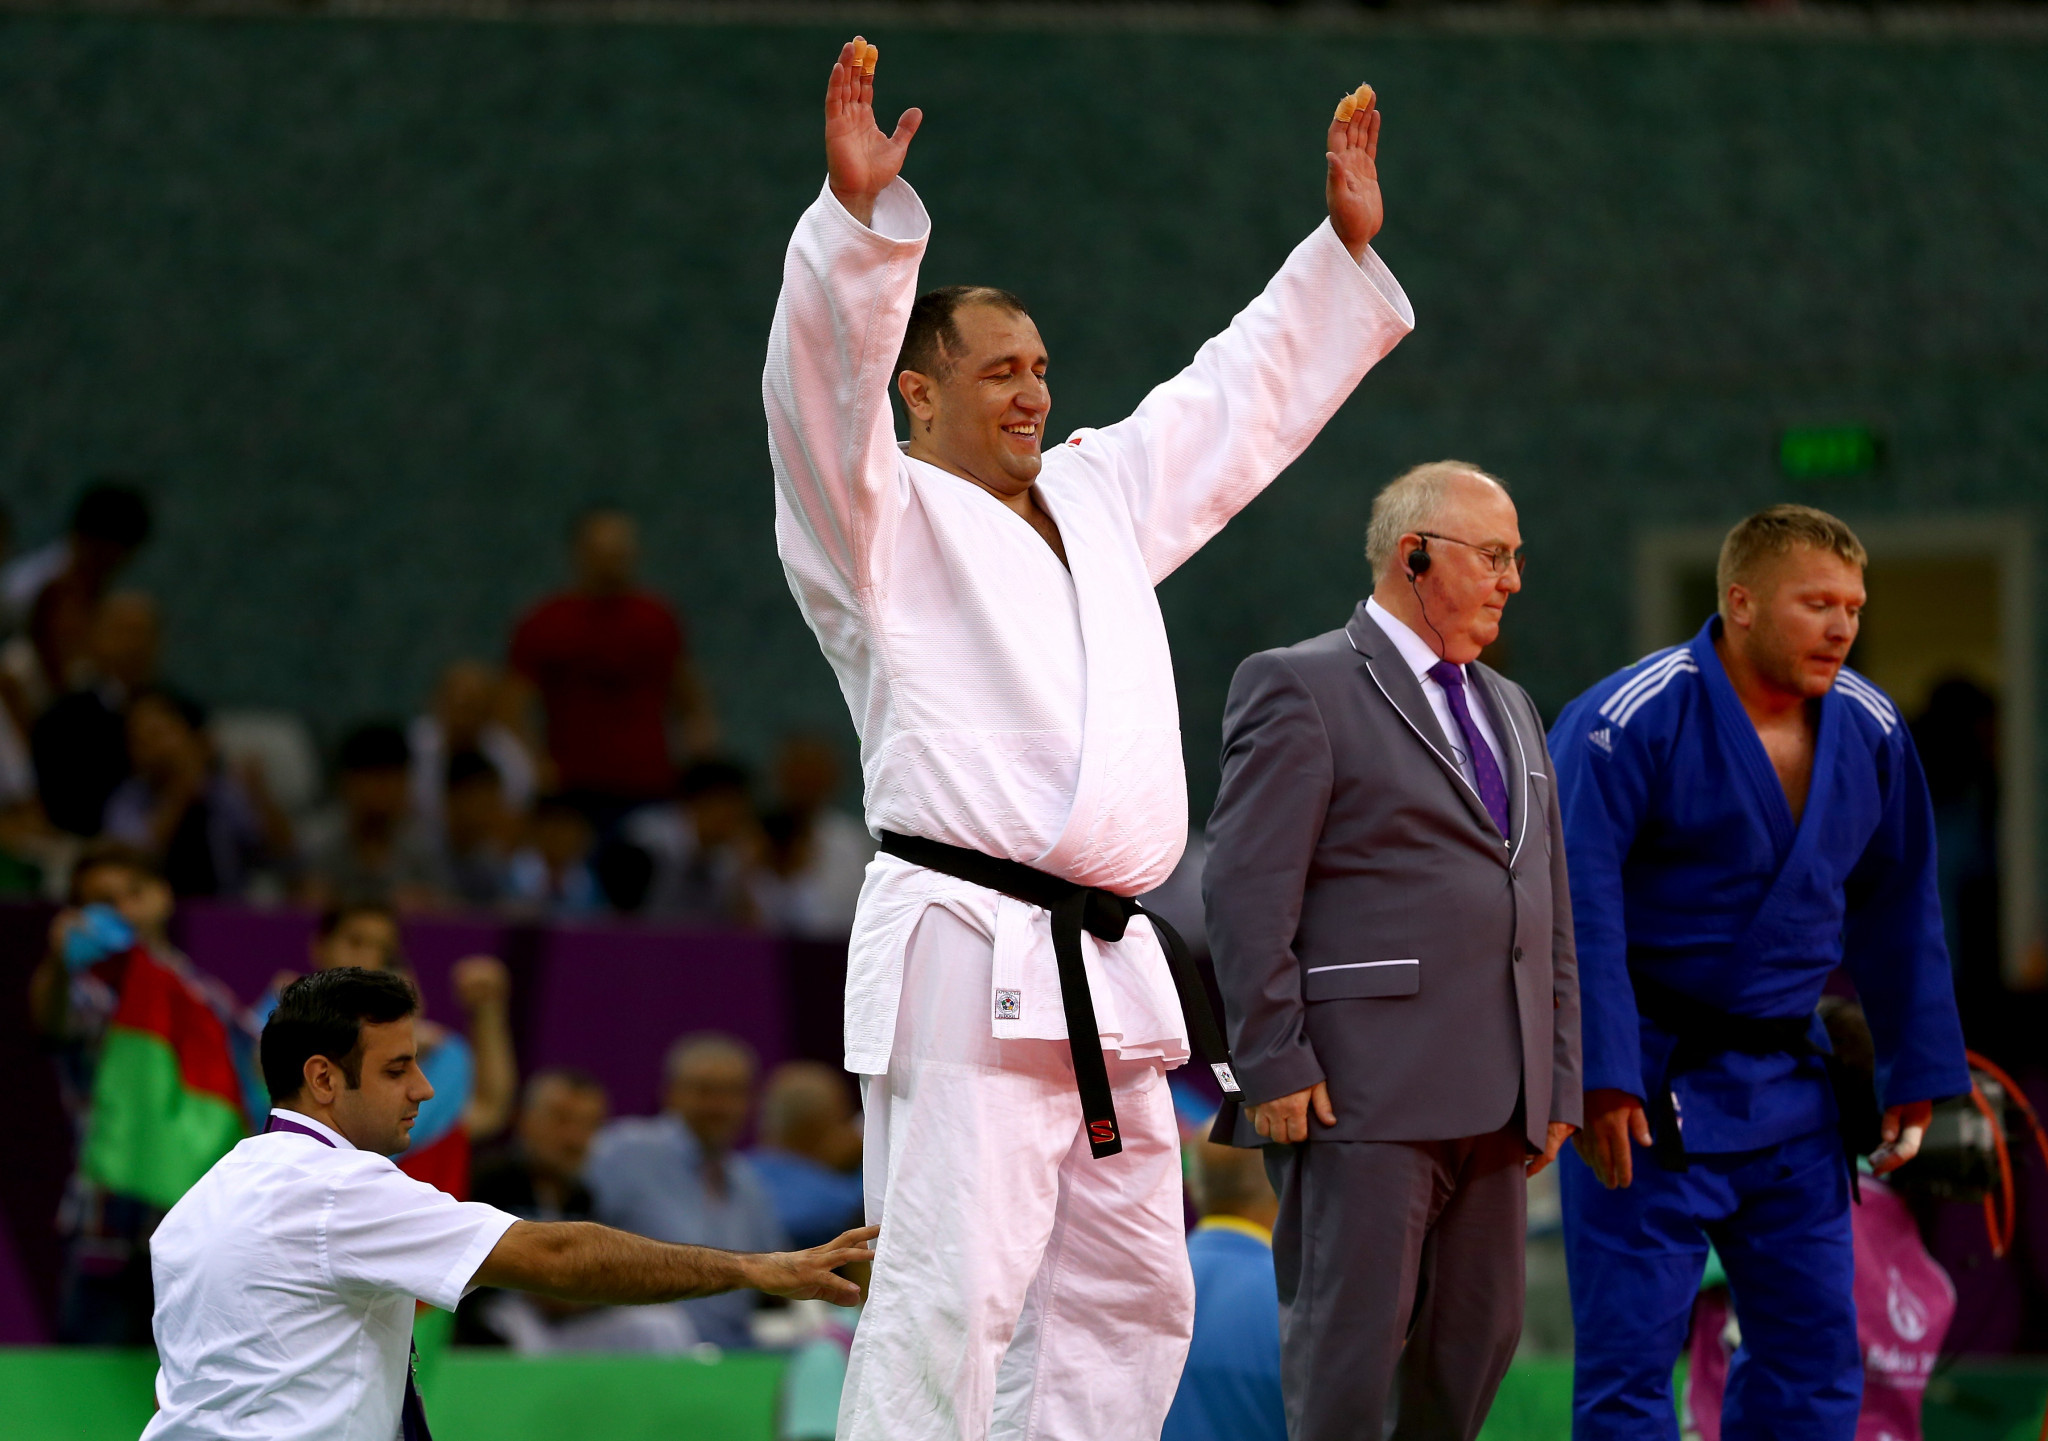 Paralympic qualification on offer at IBSA Judo World Championships in Portugal